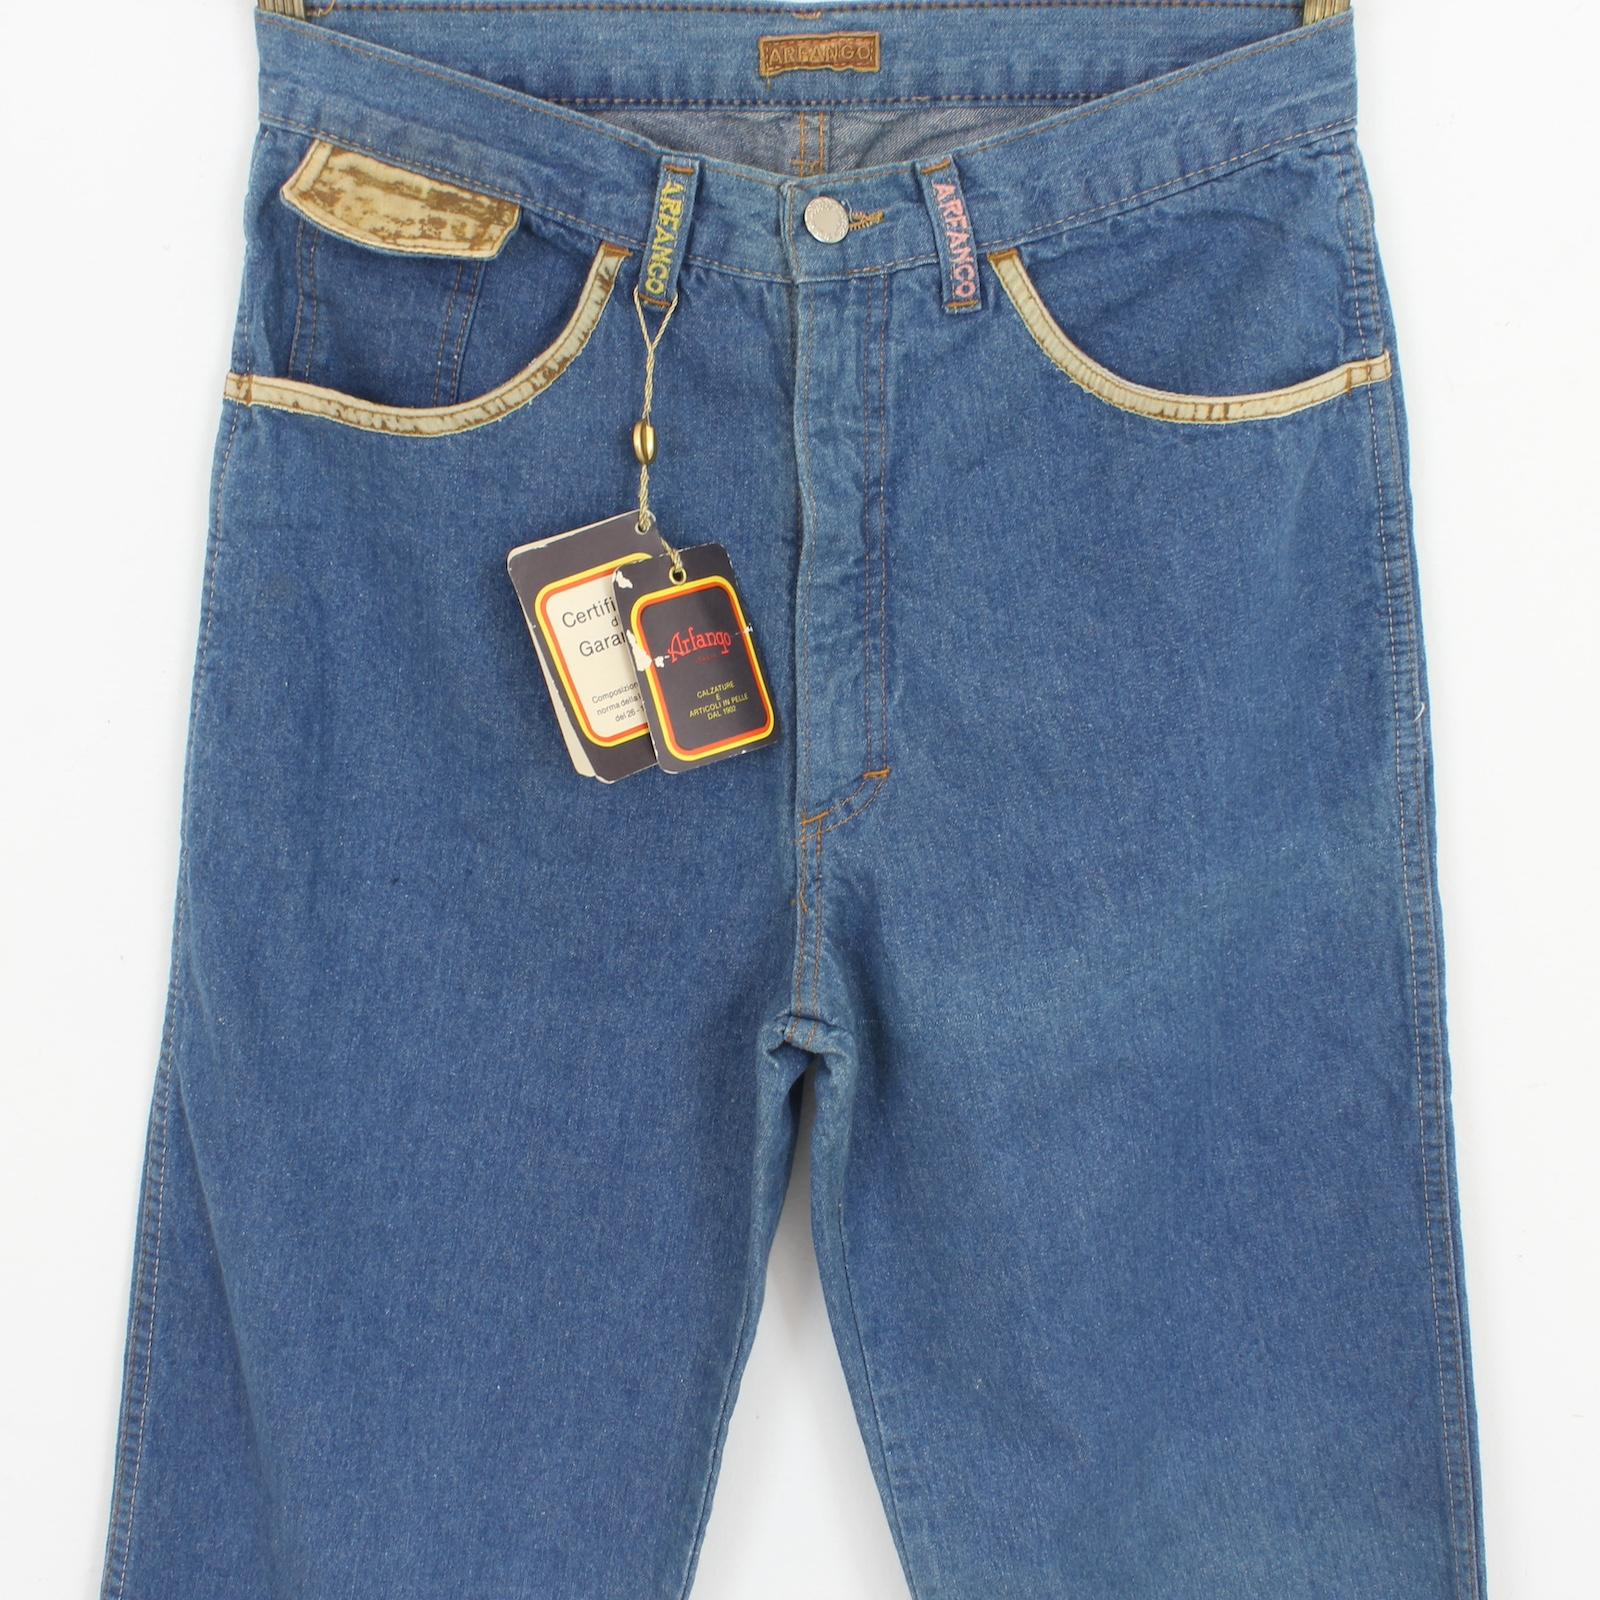 Expertly crafted by Arfango, these blue denim flared Bobby jeans offer a vintage '80s look with a high-waisted design and wide legs. Made from high quality cotton, these jeans offer comfort and durability. The perfect addition to any wardrobe for a